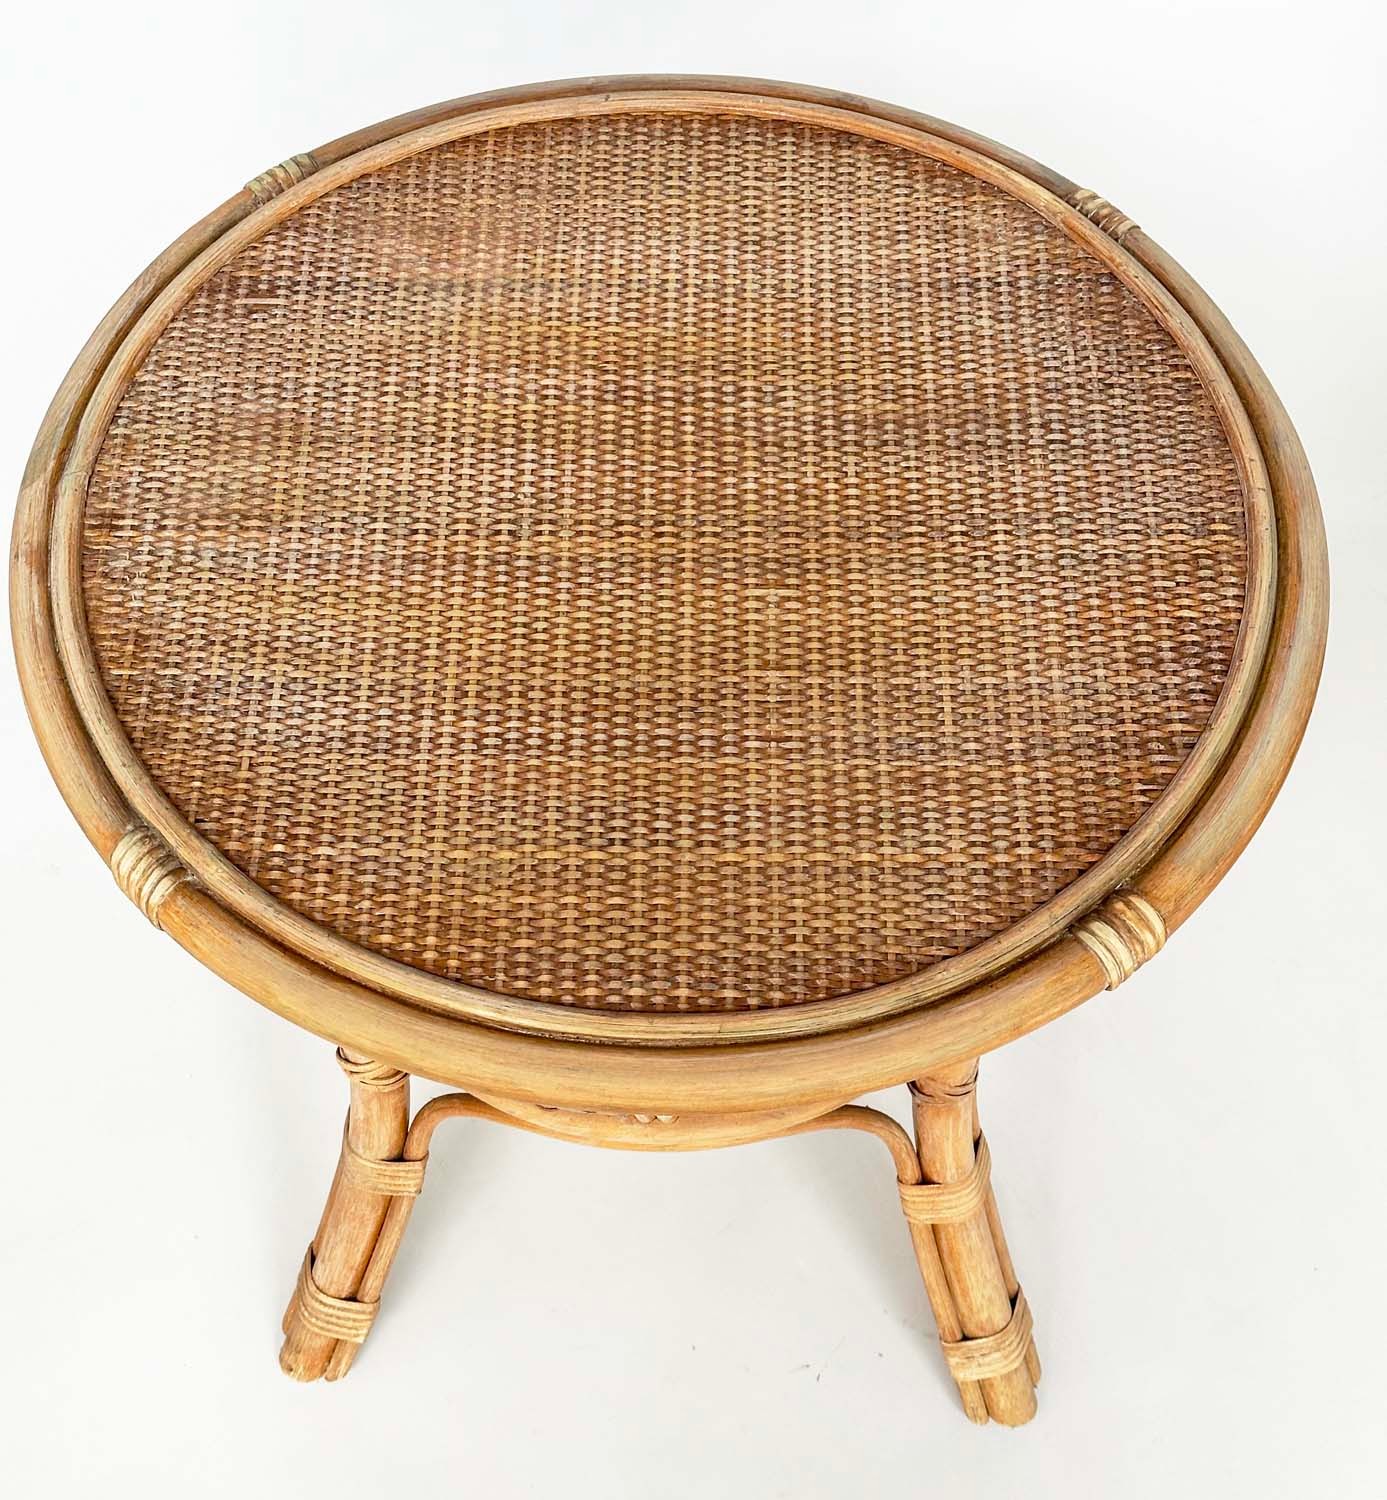 LAMP TABLES, a pair, circular rattan, wicker panelled and cane bound, 55cm x 53cm H. (2) - Image 5 of 8